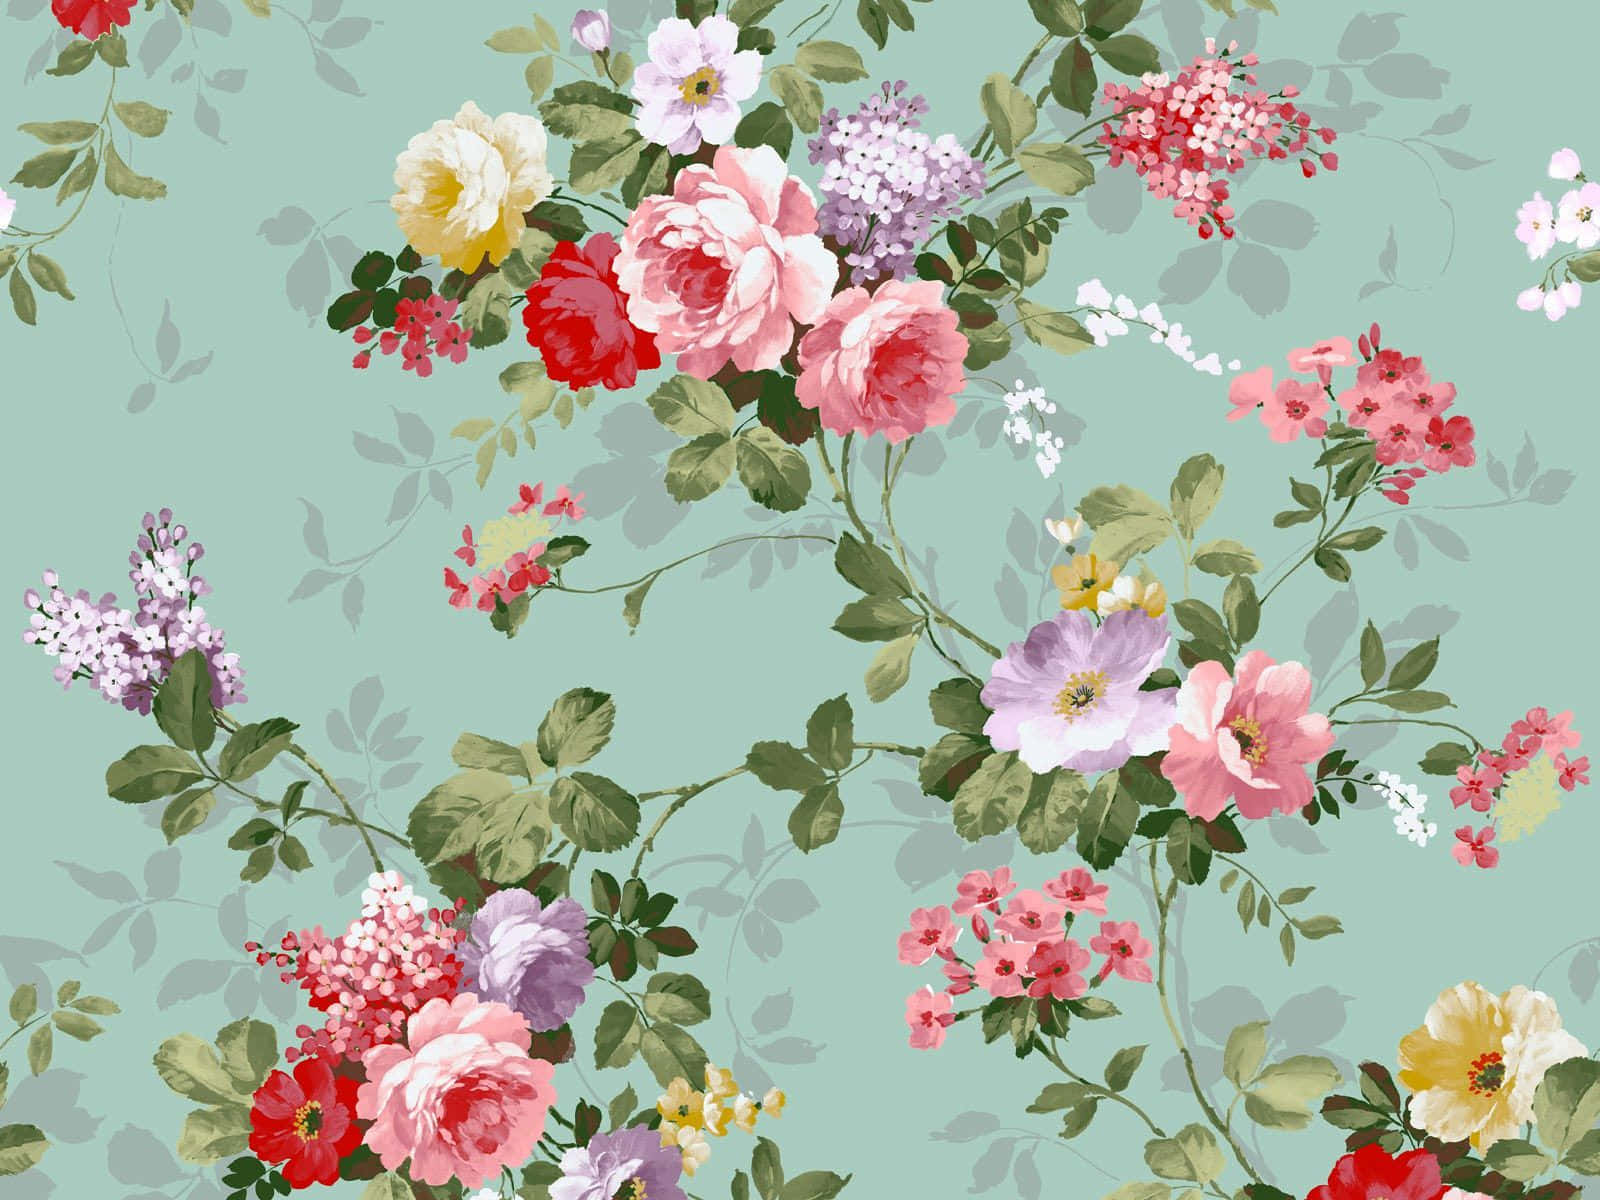 Live life in full blossom with this beautiful flower laptop background! Wallpaper